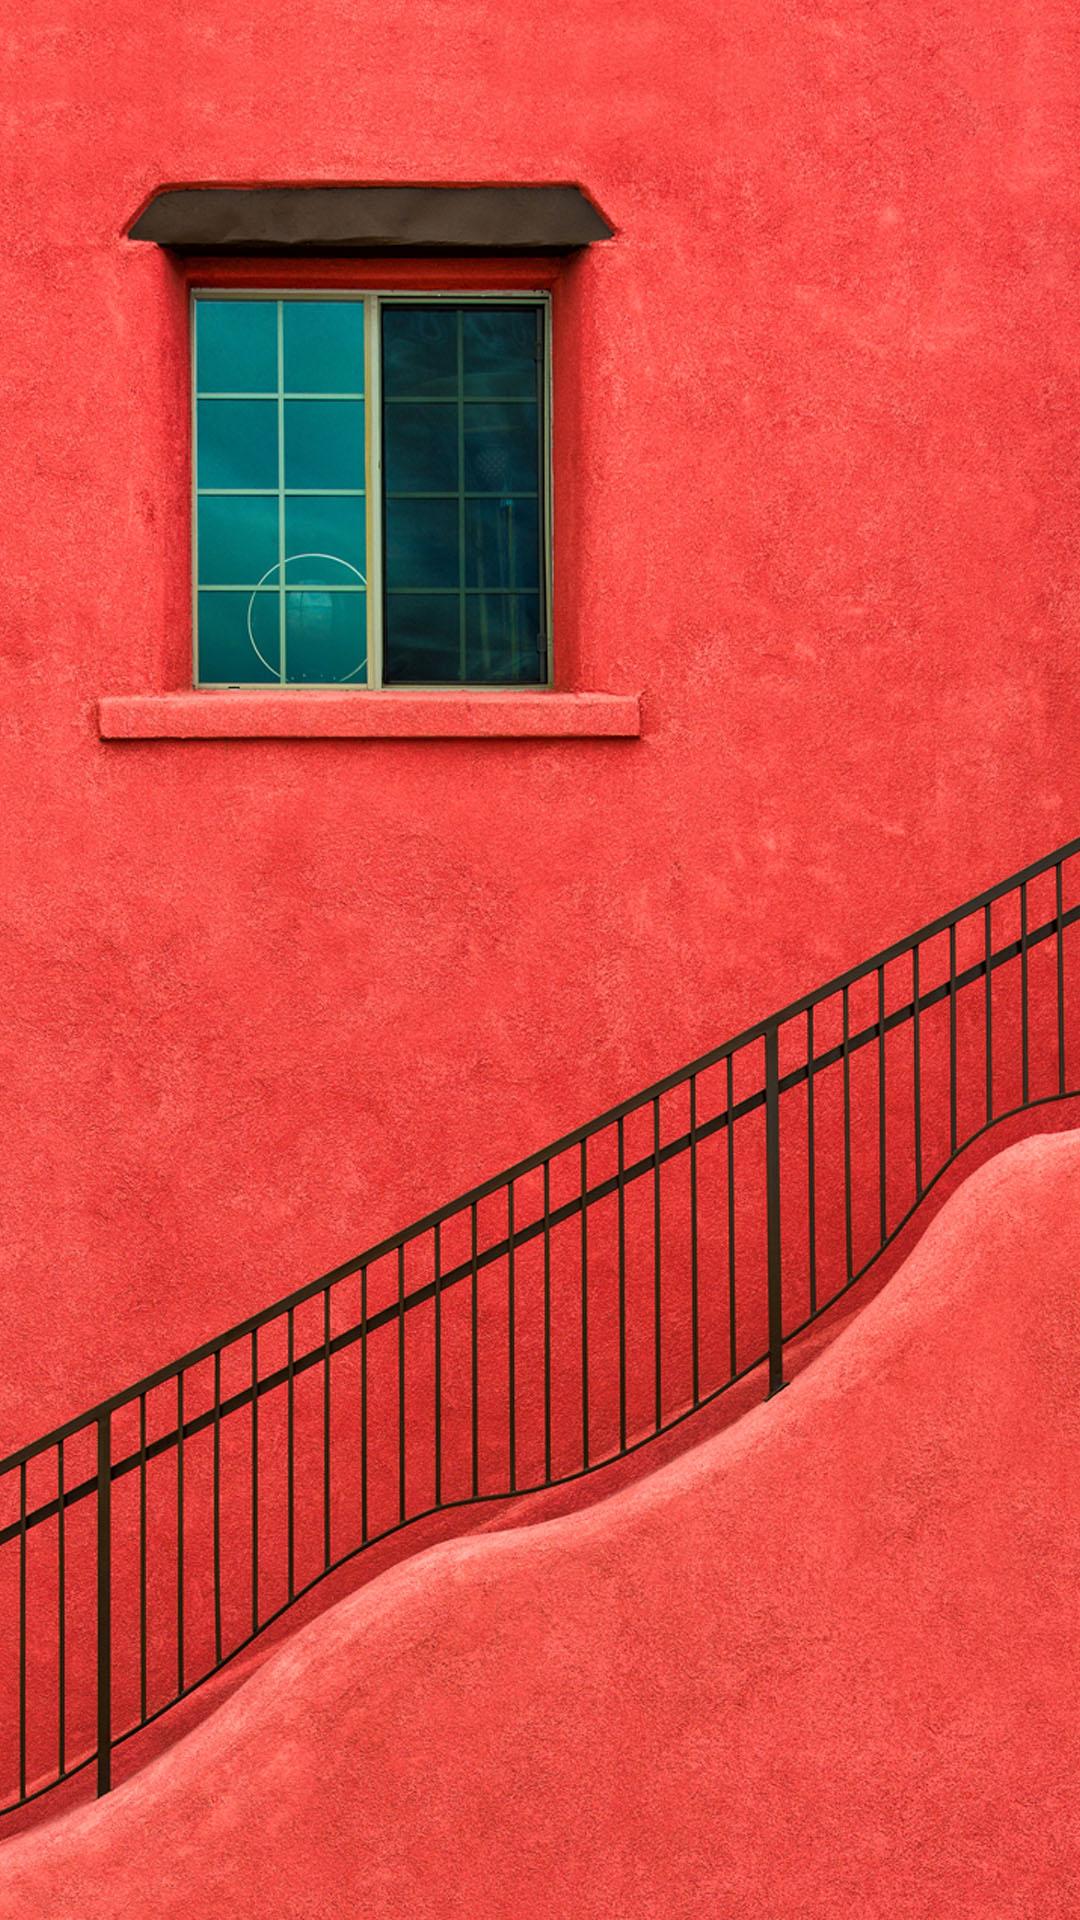 Red House Wall Window Stairs iPhone 6 Plus HD Wallpaper HD